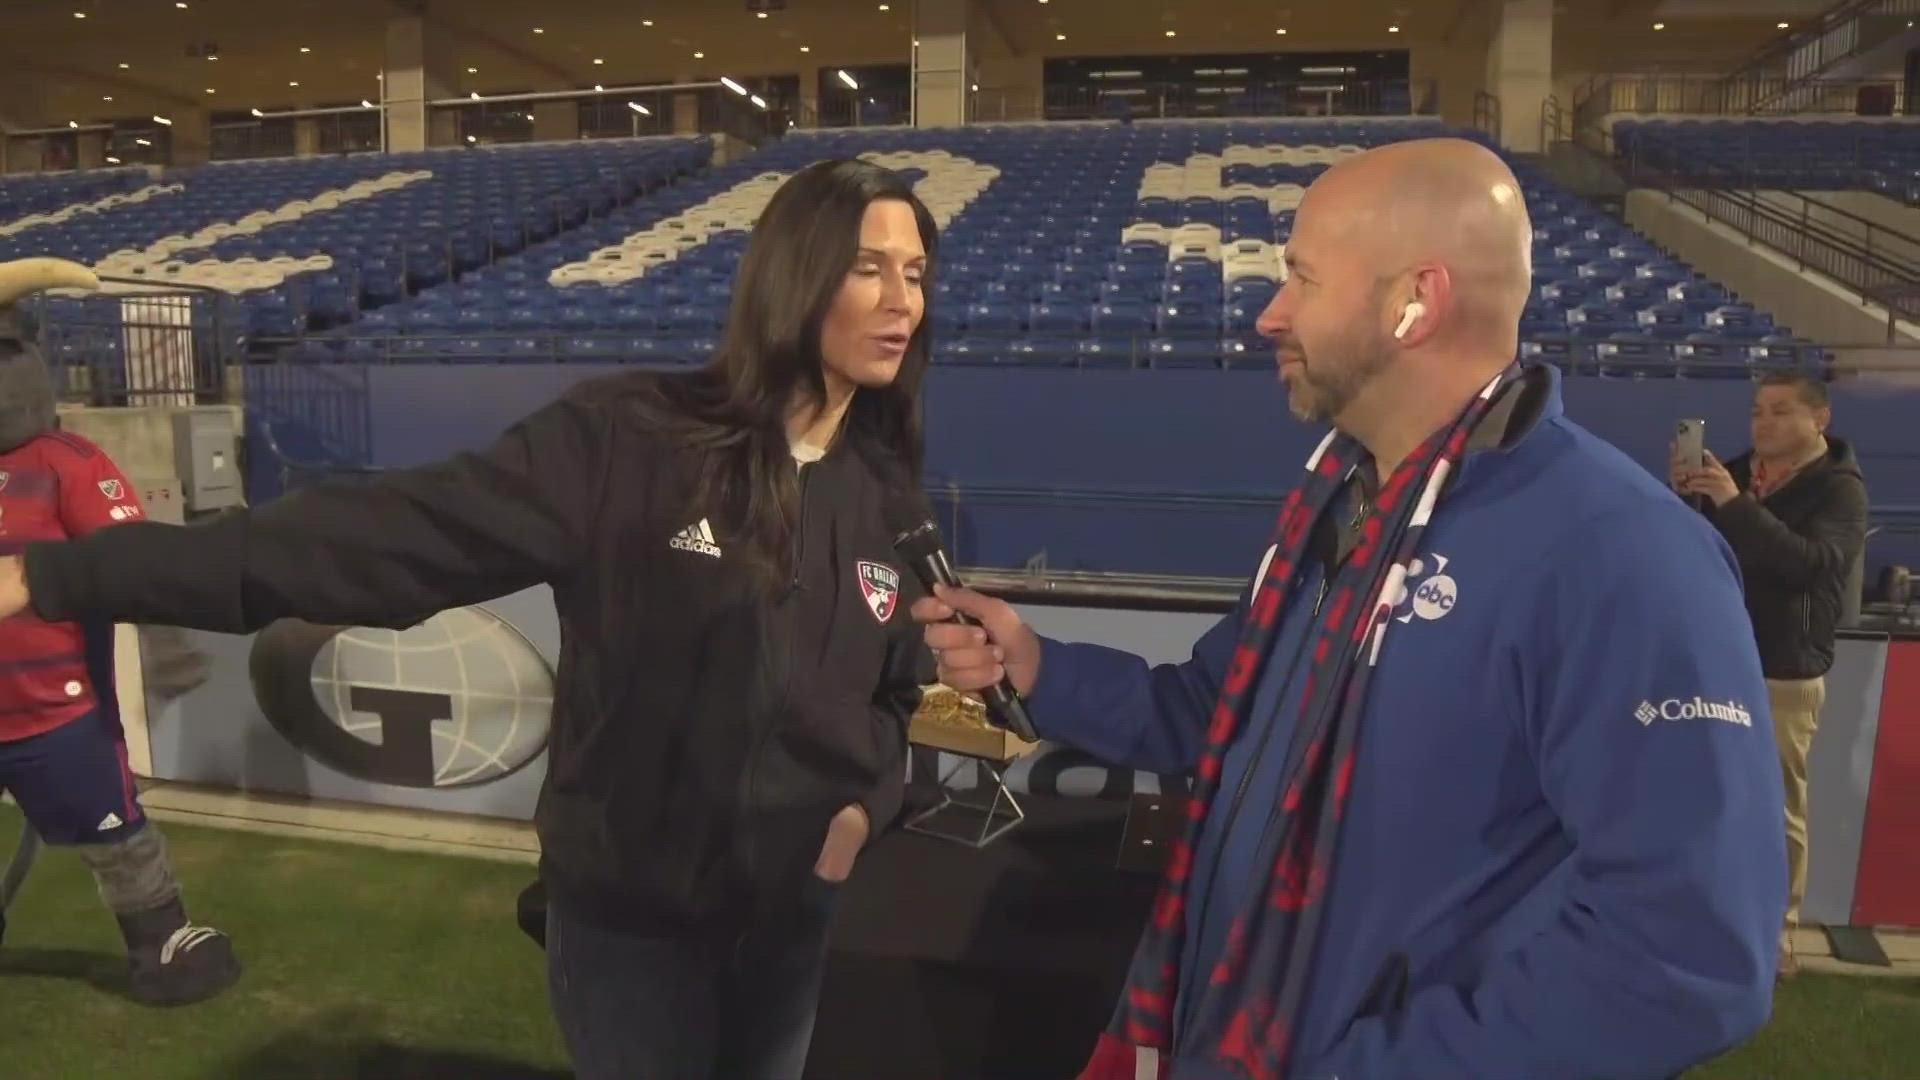 Chris Sadeghi was up early at Toyota Stadium to get a look at what fans can expect at FC Dallas games this year.